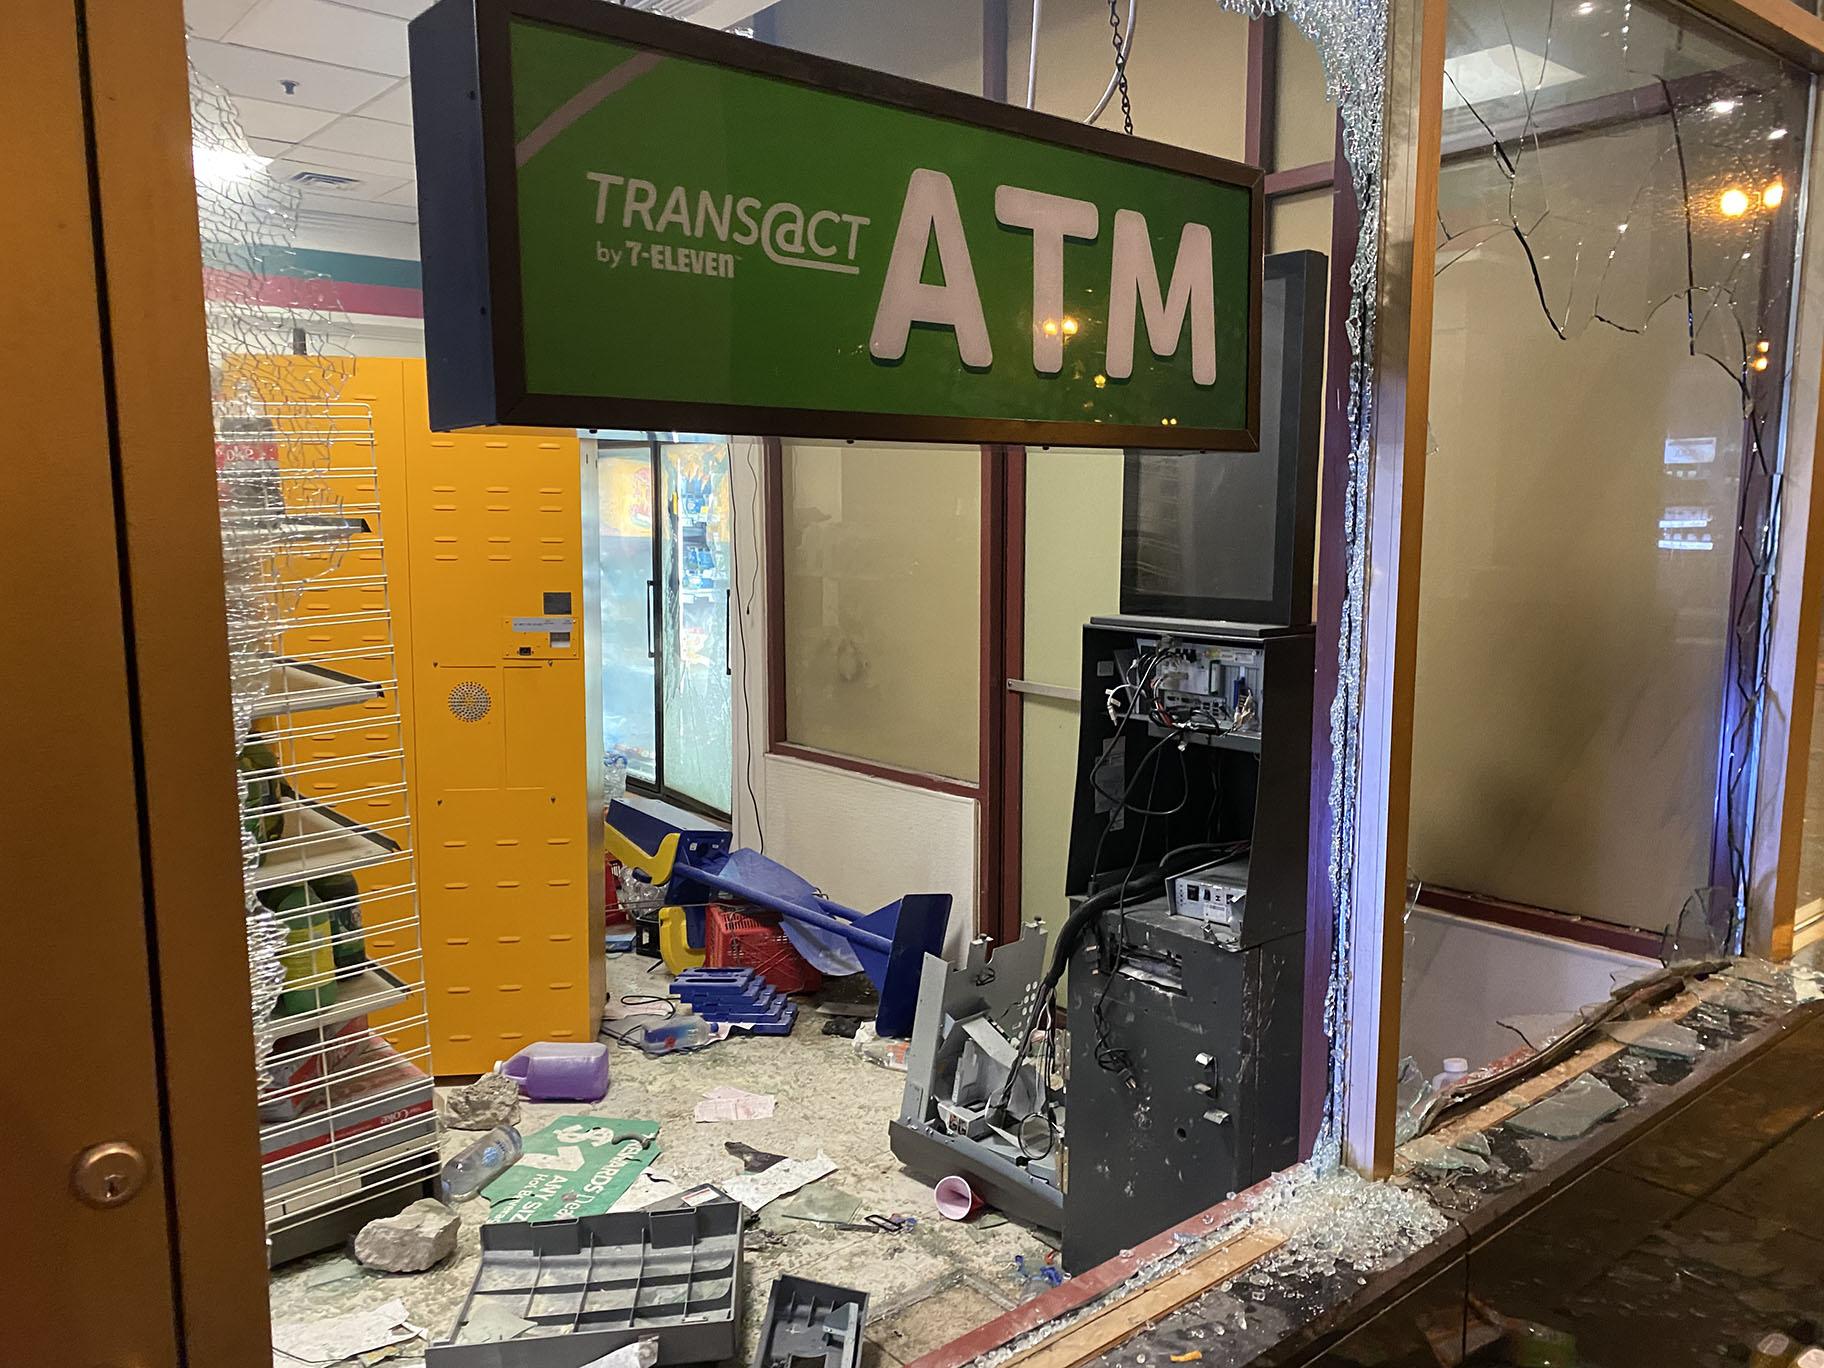 An ATM in the Loop is destroyed and windows are smashed on Saturday, May 30, 2020. (Hugo Balta / WTTW News)